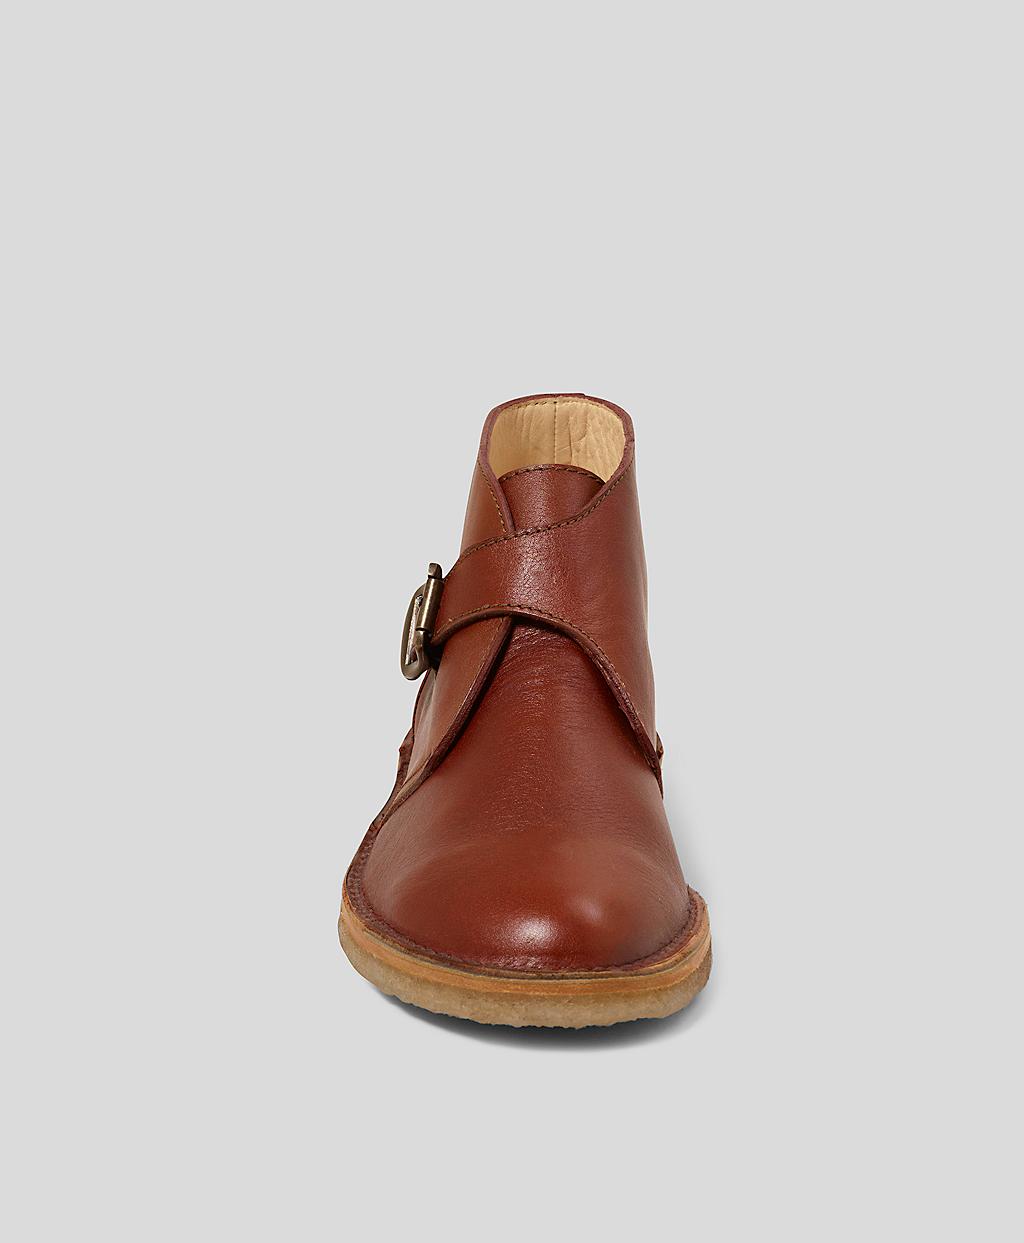 Lyst - Brooks Brothers Leather Monk Strap Desert Boots in Brown for Men